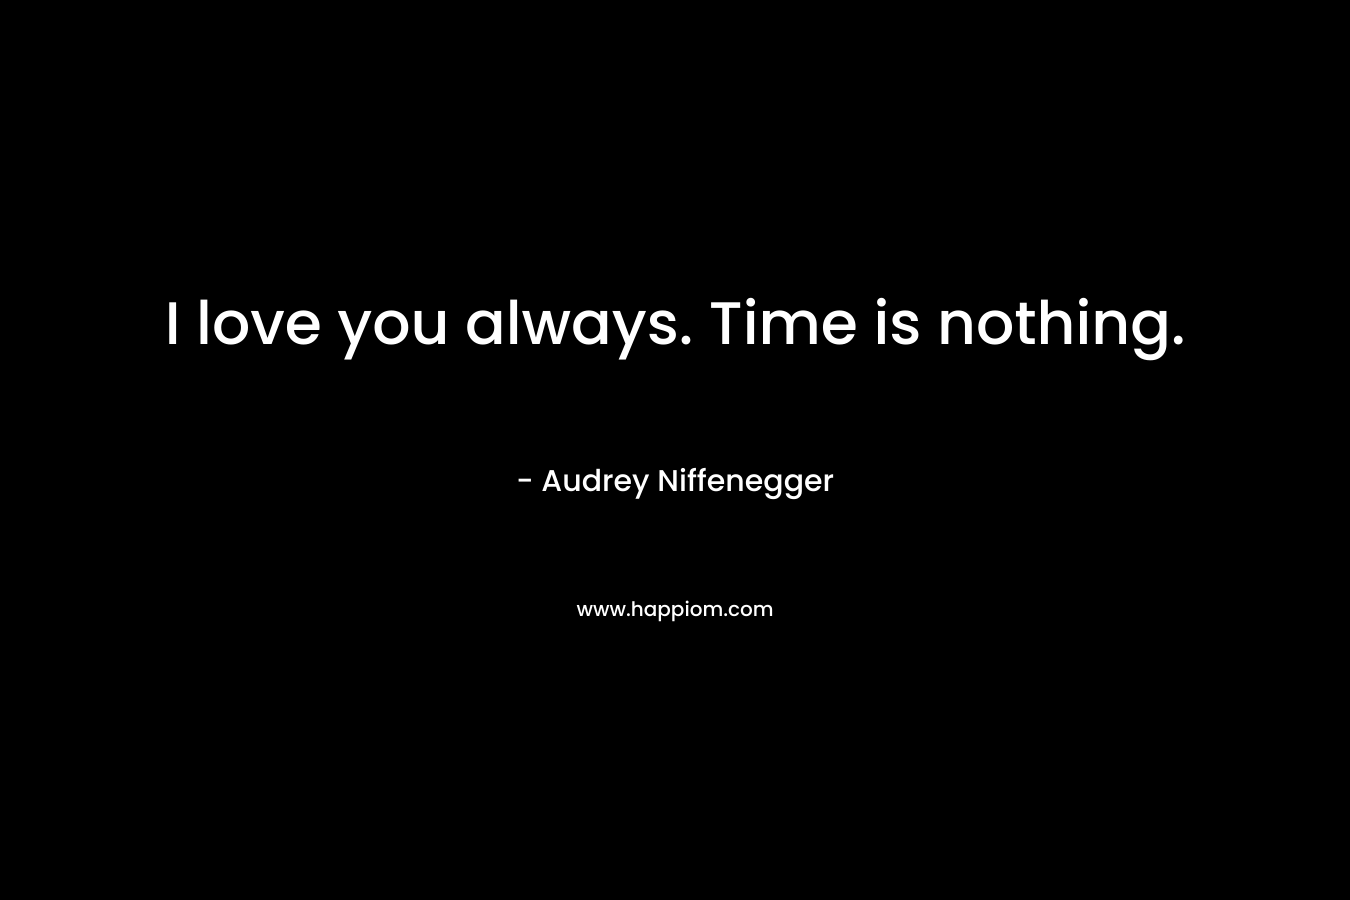 I love you always. Time is nothing. – Audrey Niffenegger